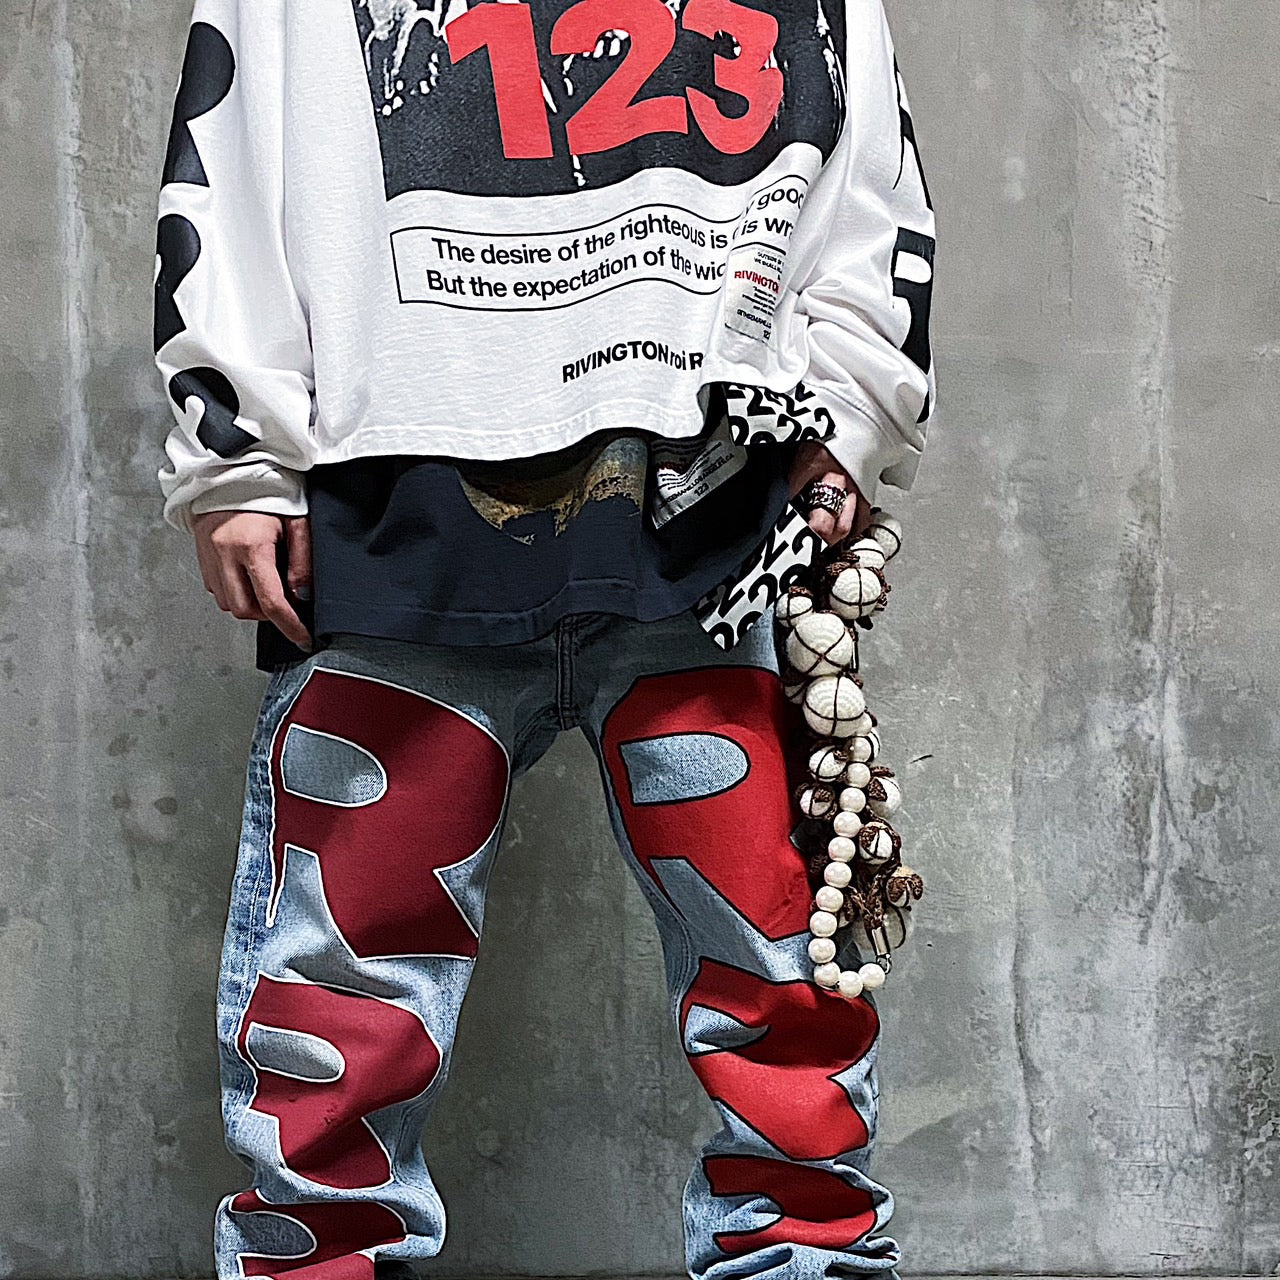 【RRR123】<br> New tops and bottoms are available! Check out the latest FW23 items!